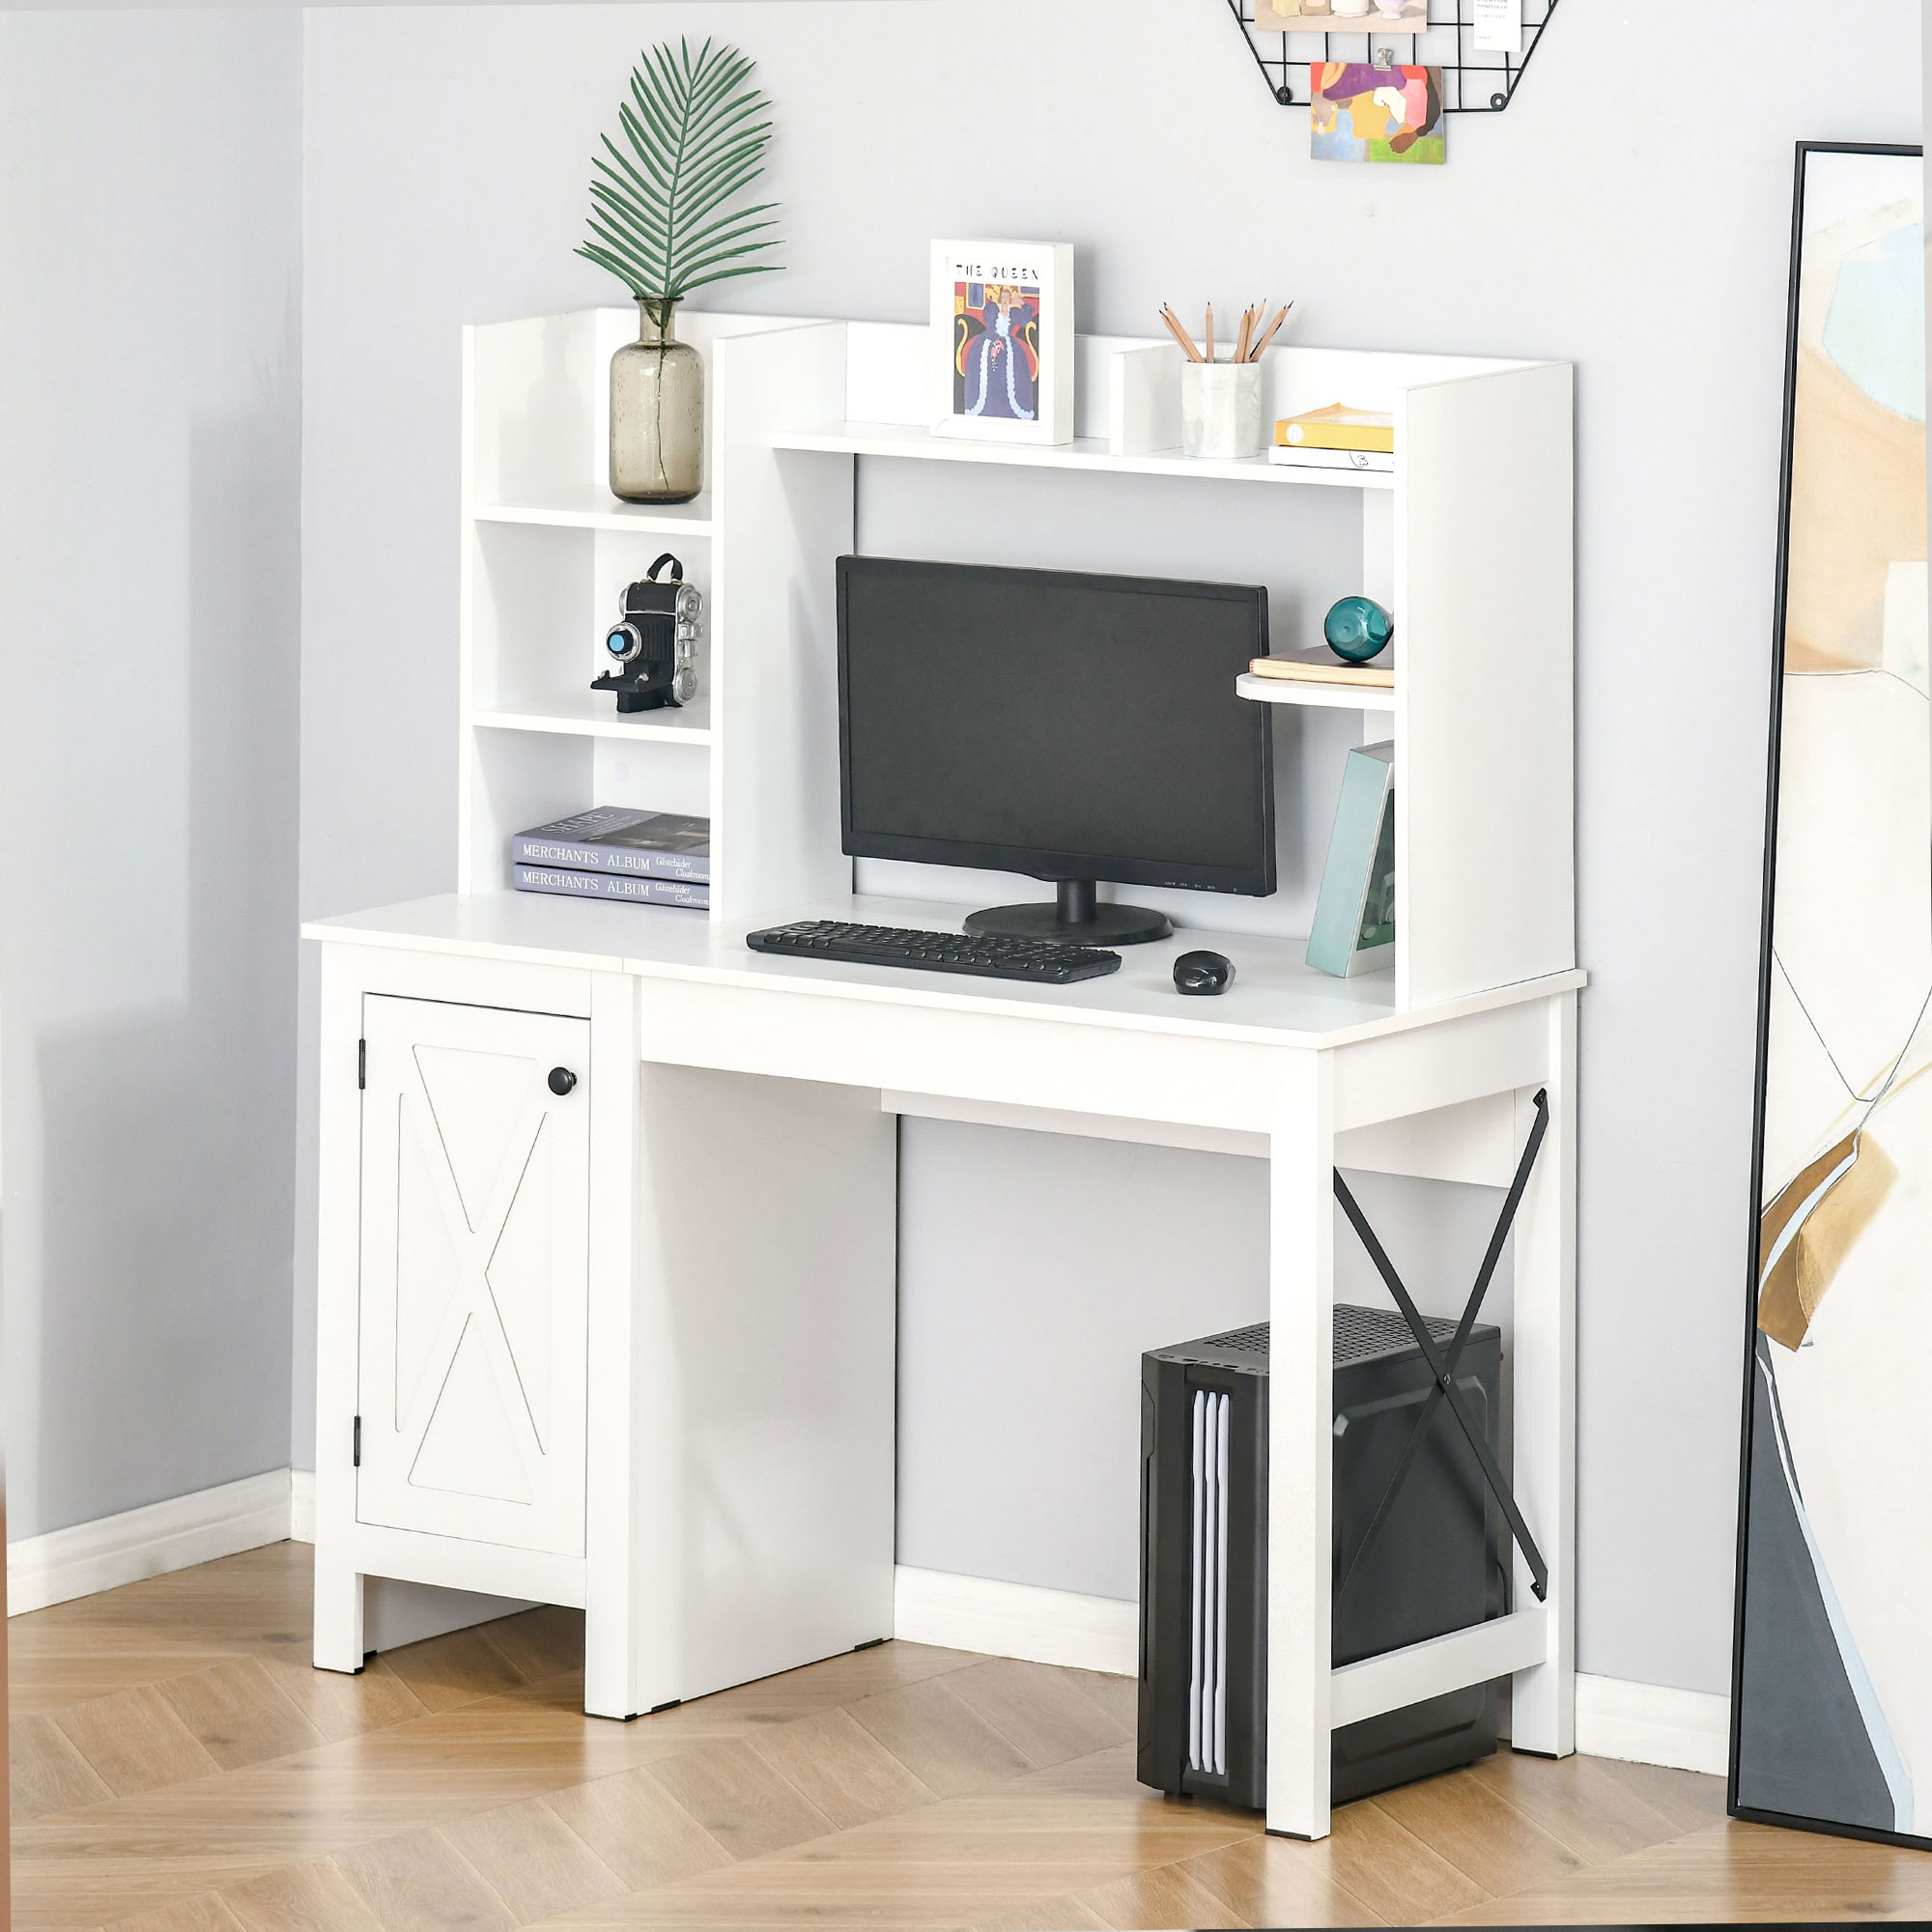 Homcom Farmhouse Computer Desk with Hutch and Cabinet, Home Office Desk with Storage, White - image 2 of 9